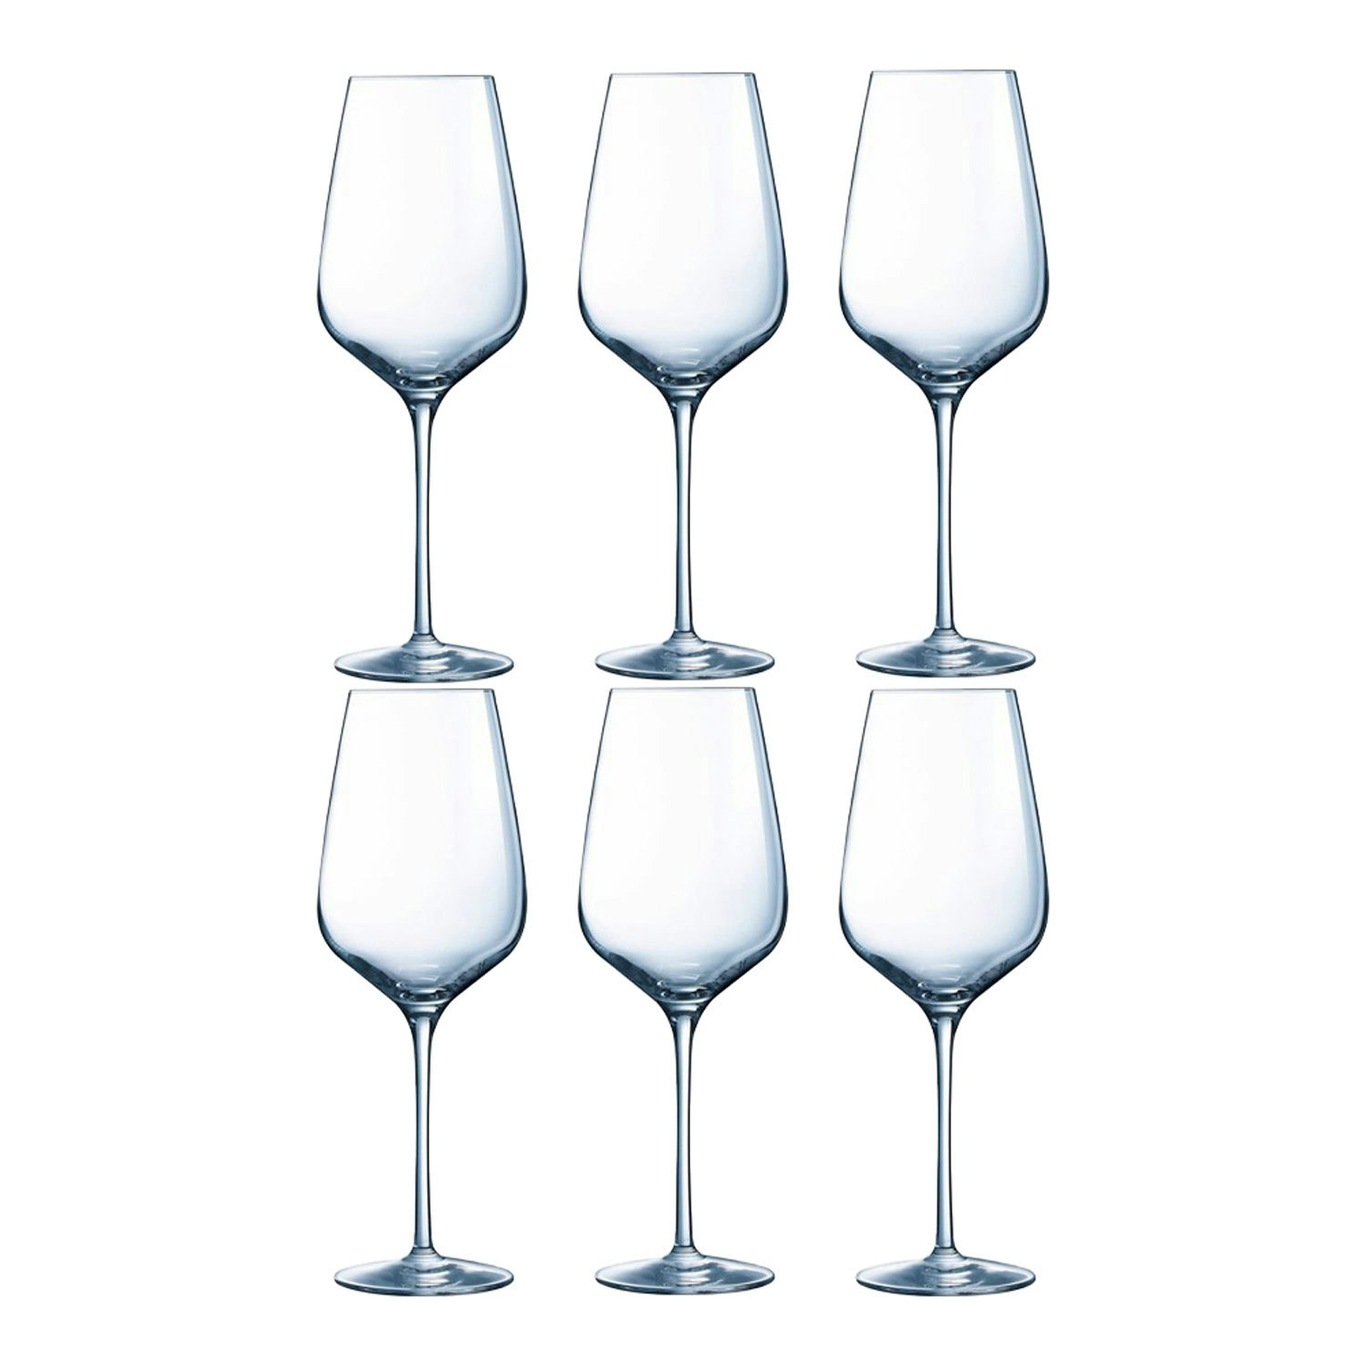 https://royaldesign.com/image/11/chefsommelier-sublym-white-wine-glass-25-cl-6-pack-0?w=800&quality=80